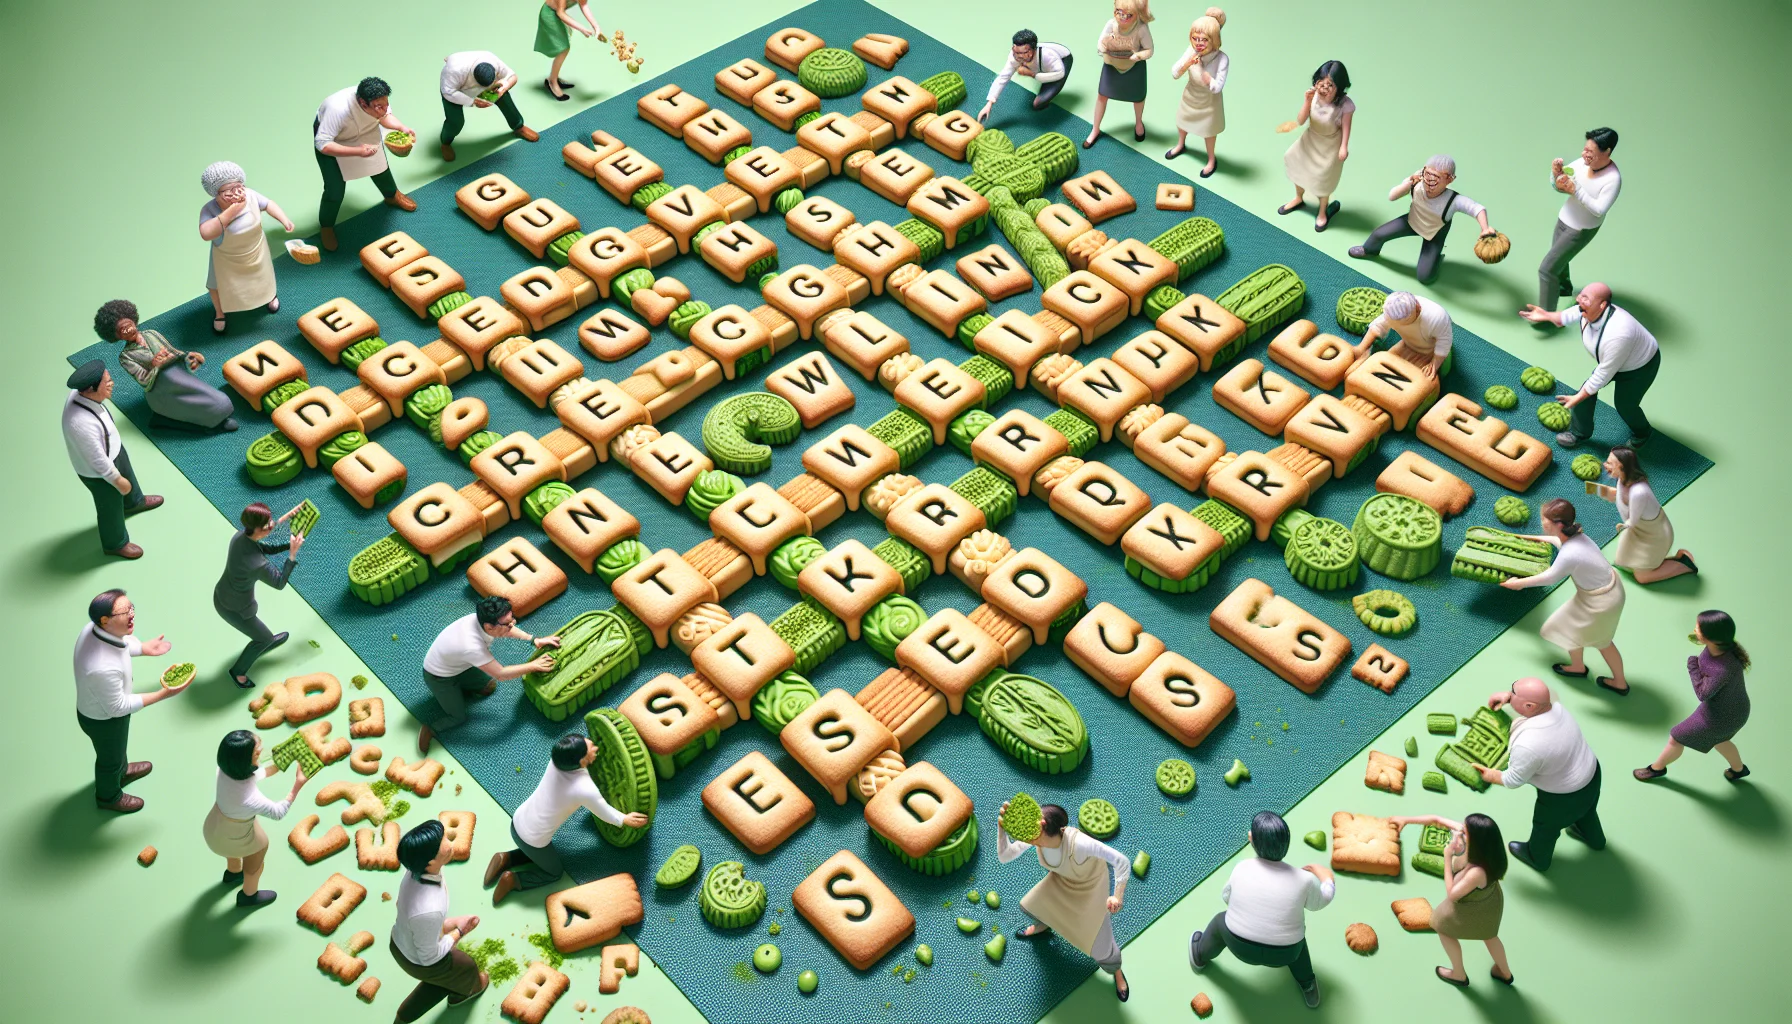 Visualize a humorous scenario involving a giant green tea-flavored crossword puzzle composed of cookies and biscuits. Each alphabet of this unbelievably appetizing crossword is carefully crafted from green tea-infused treats. People from various descents around the world, ranging from East Asian to Caucasian to Hispanic and African, both men and women, are seen gravitating towards the crossword with curiosity and delight, occasionally breaking off parts of the treats from the crossword and enjoying them. They express various comical expressions of surprise, joy and unique ways of solving the crossword and relishing their rewards.